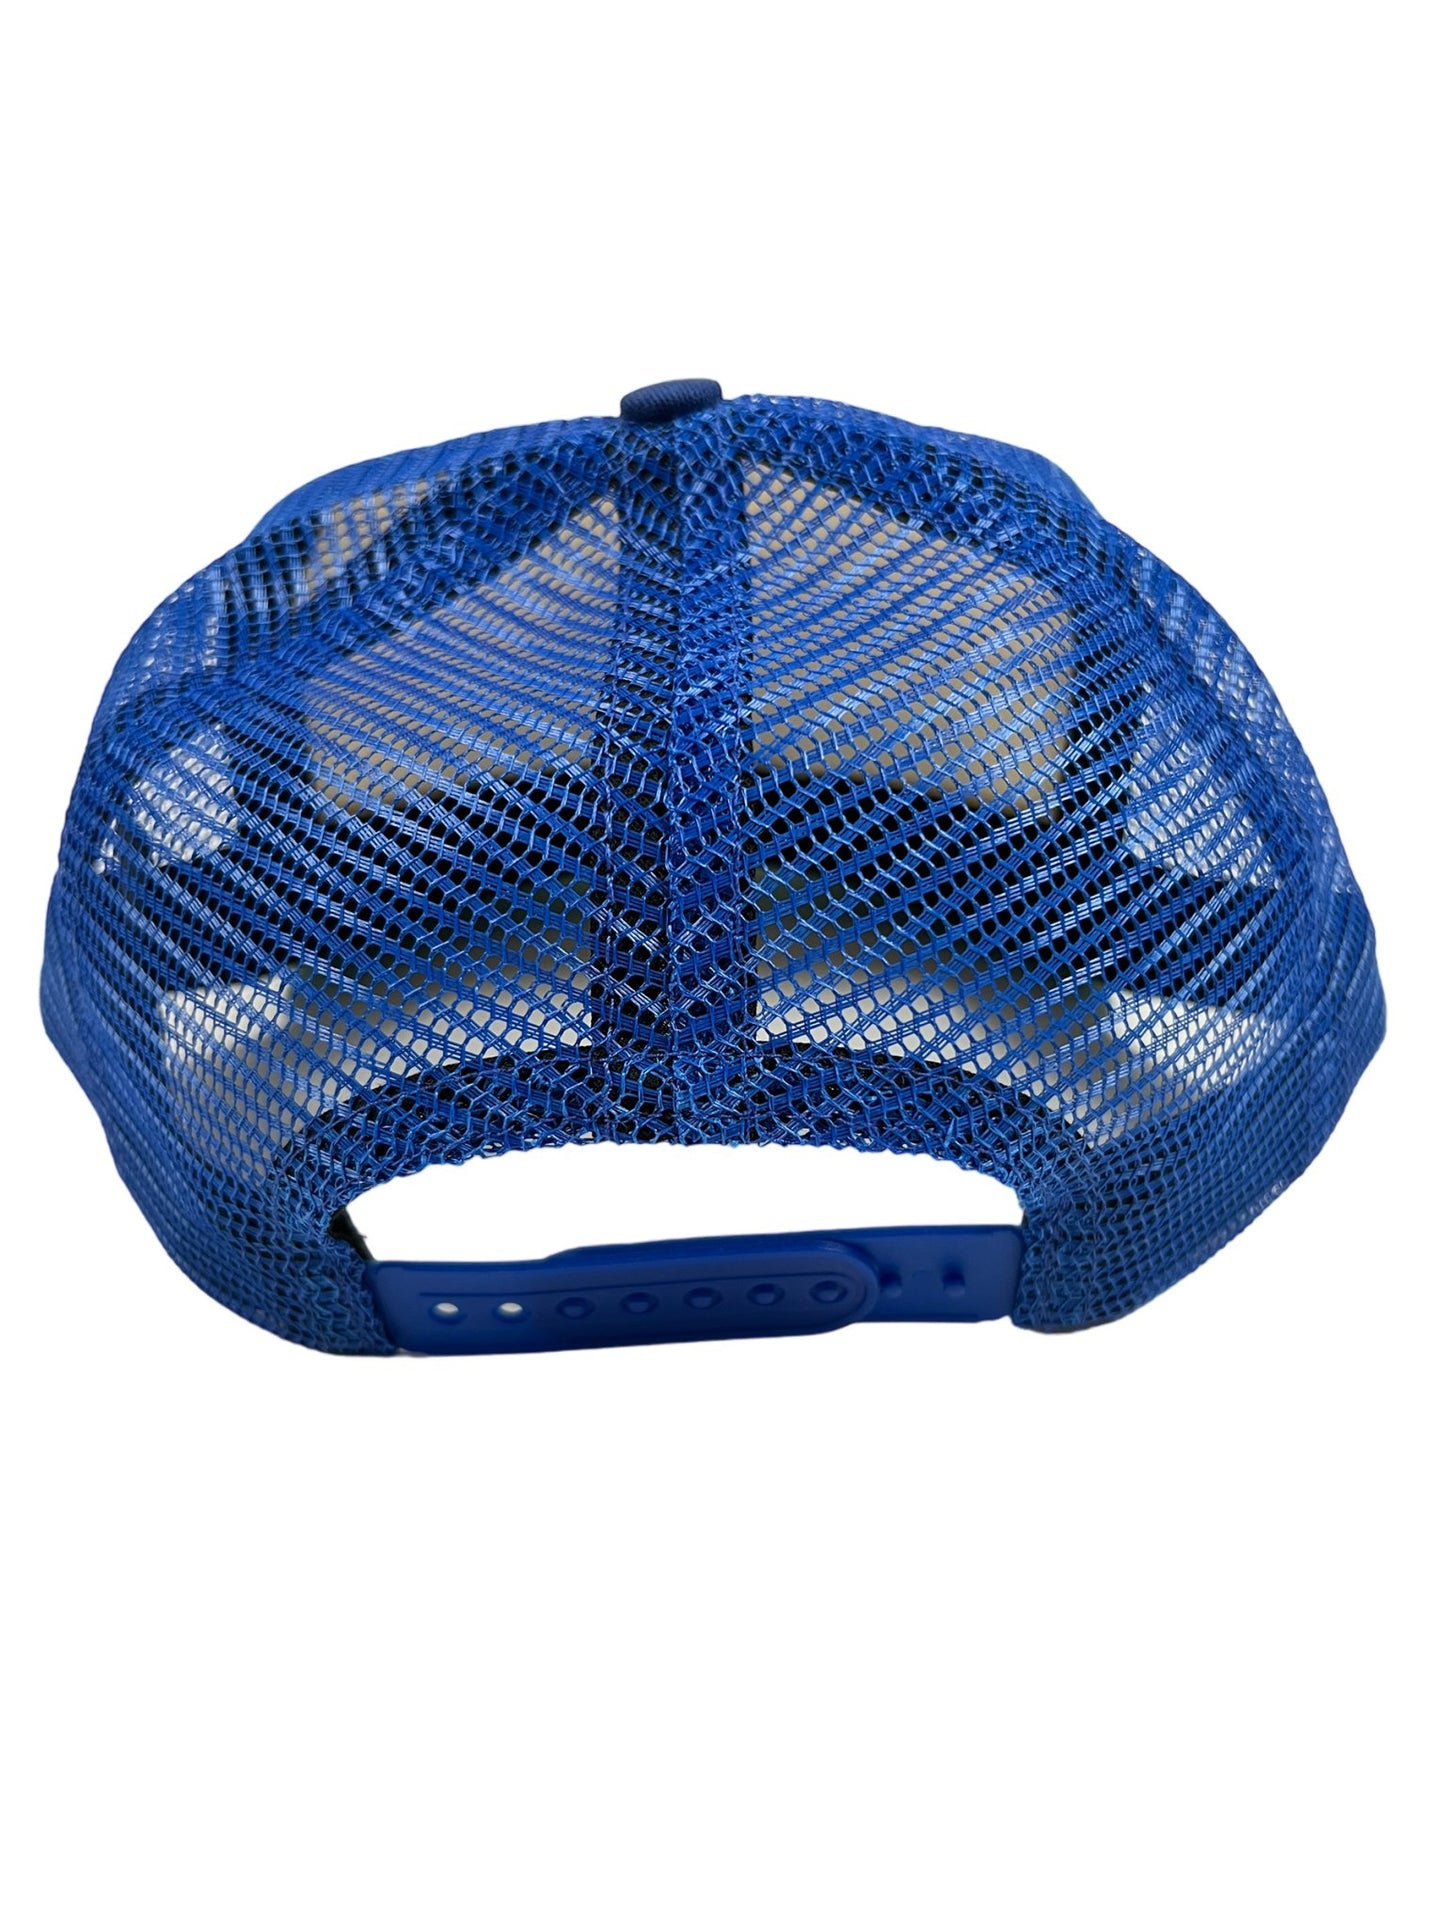 A blue mesh RHUDE AUTO RACING TRUCKER HAT NAVY/IVORY on a white background.